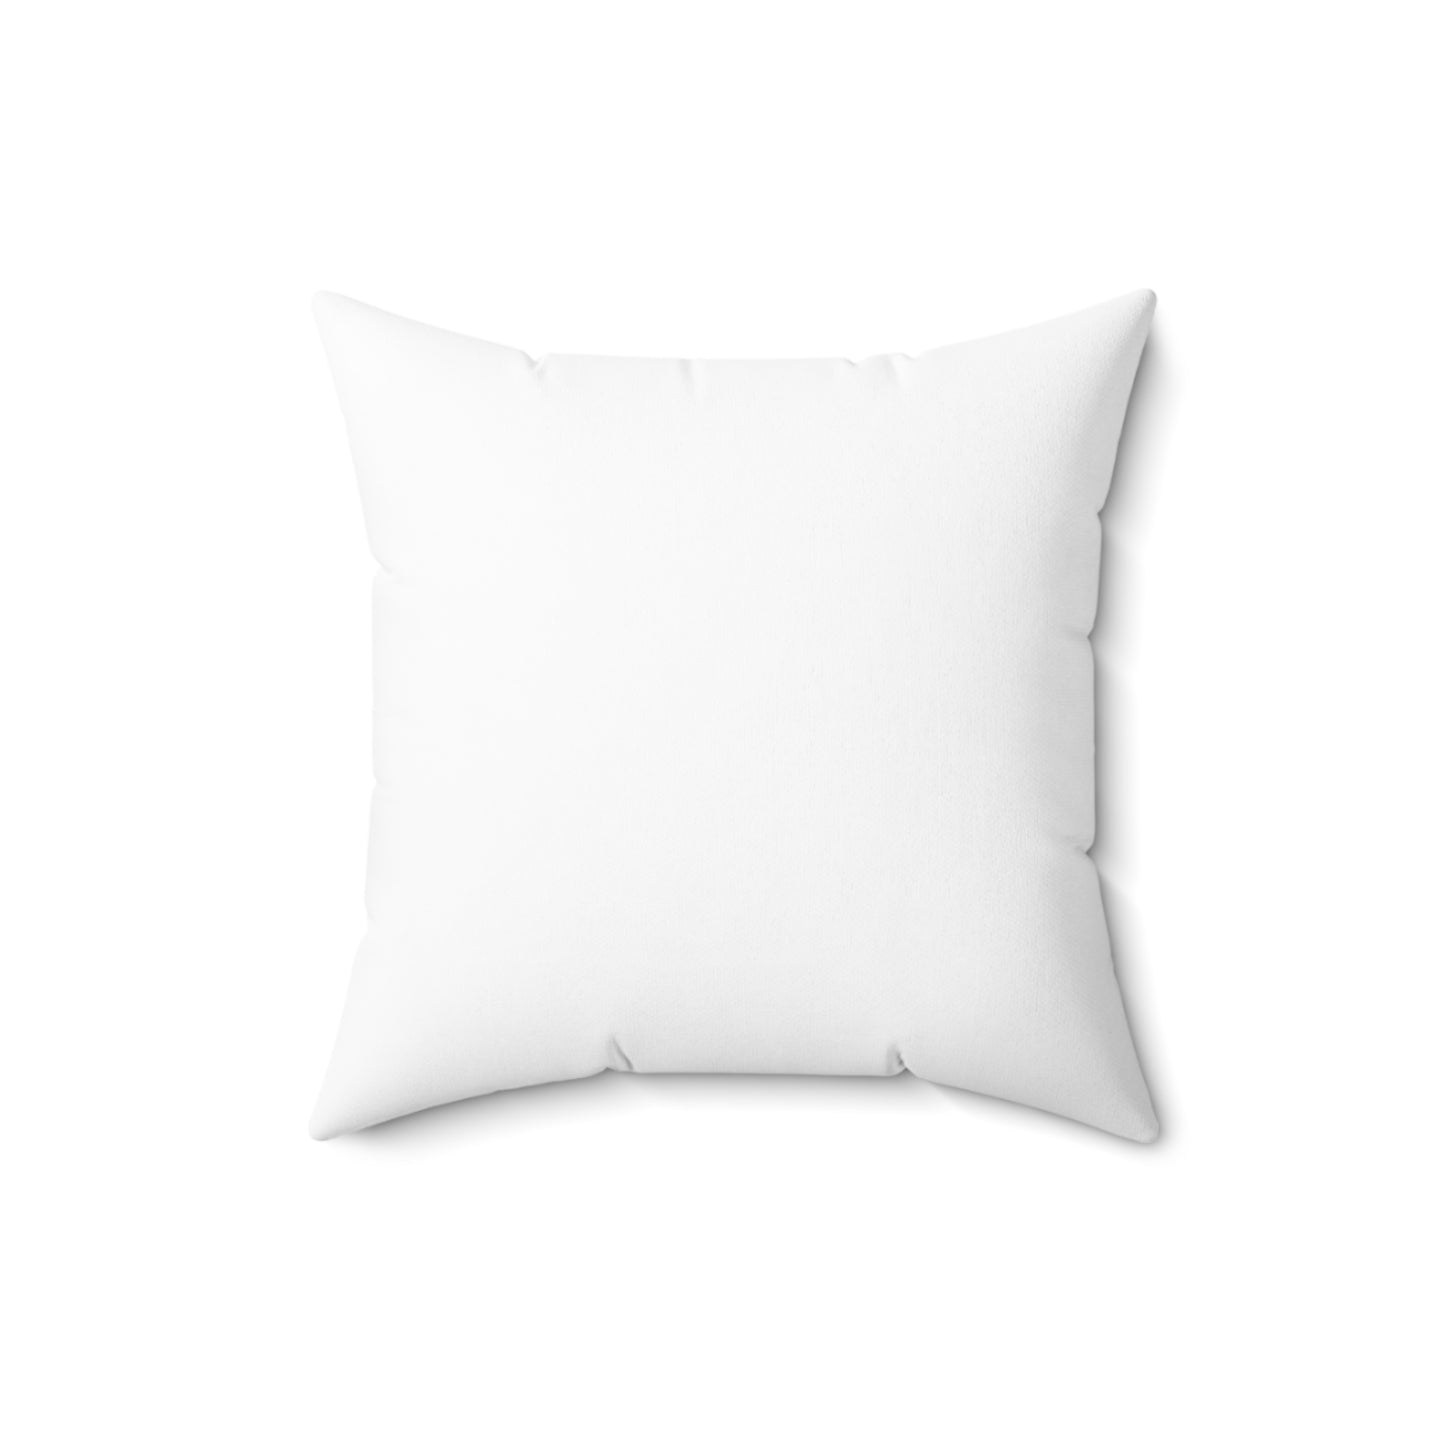 Polyester Square Pillow- Waverley Paddle Steamer Design